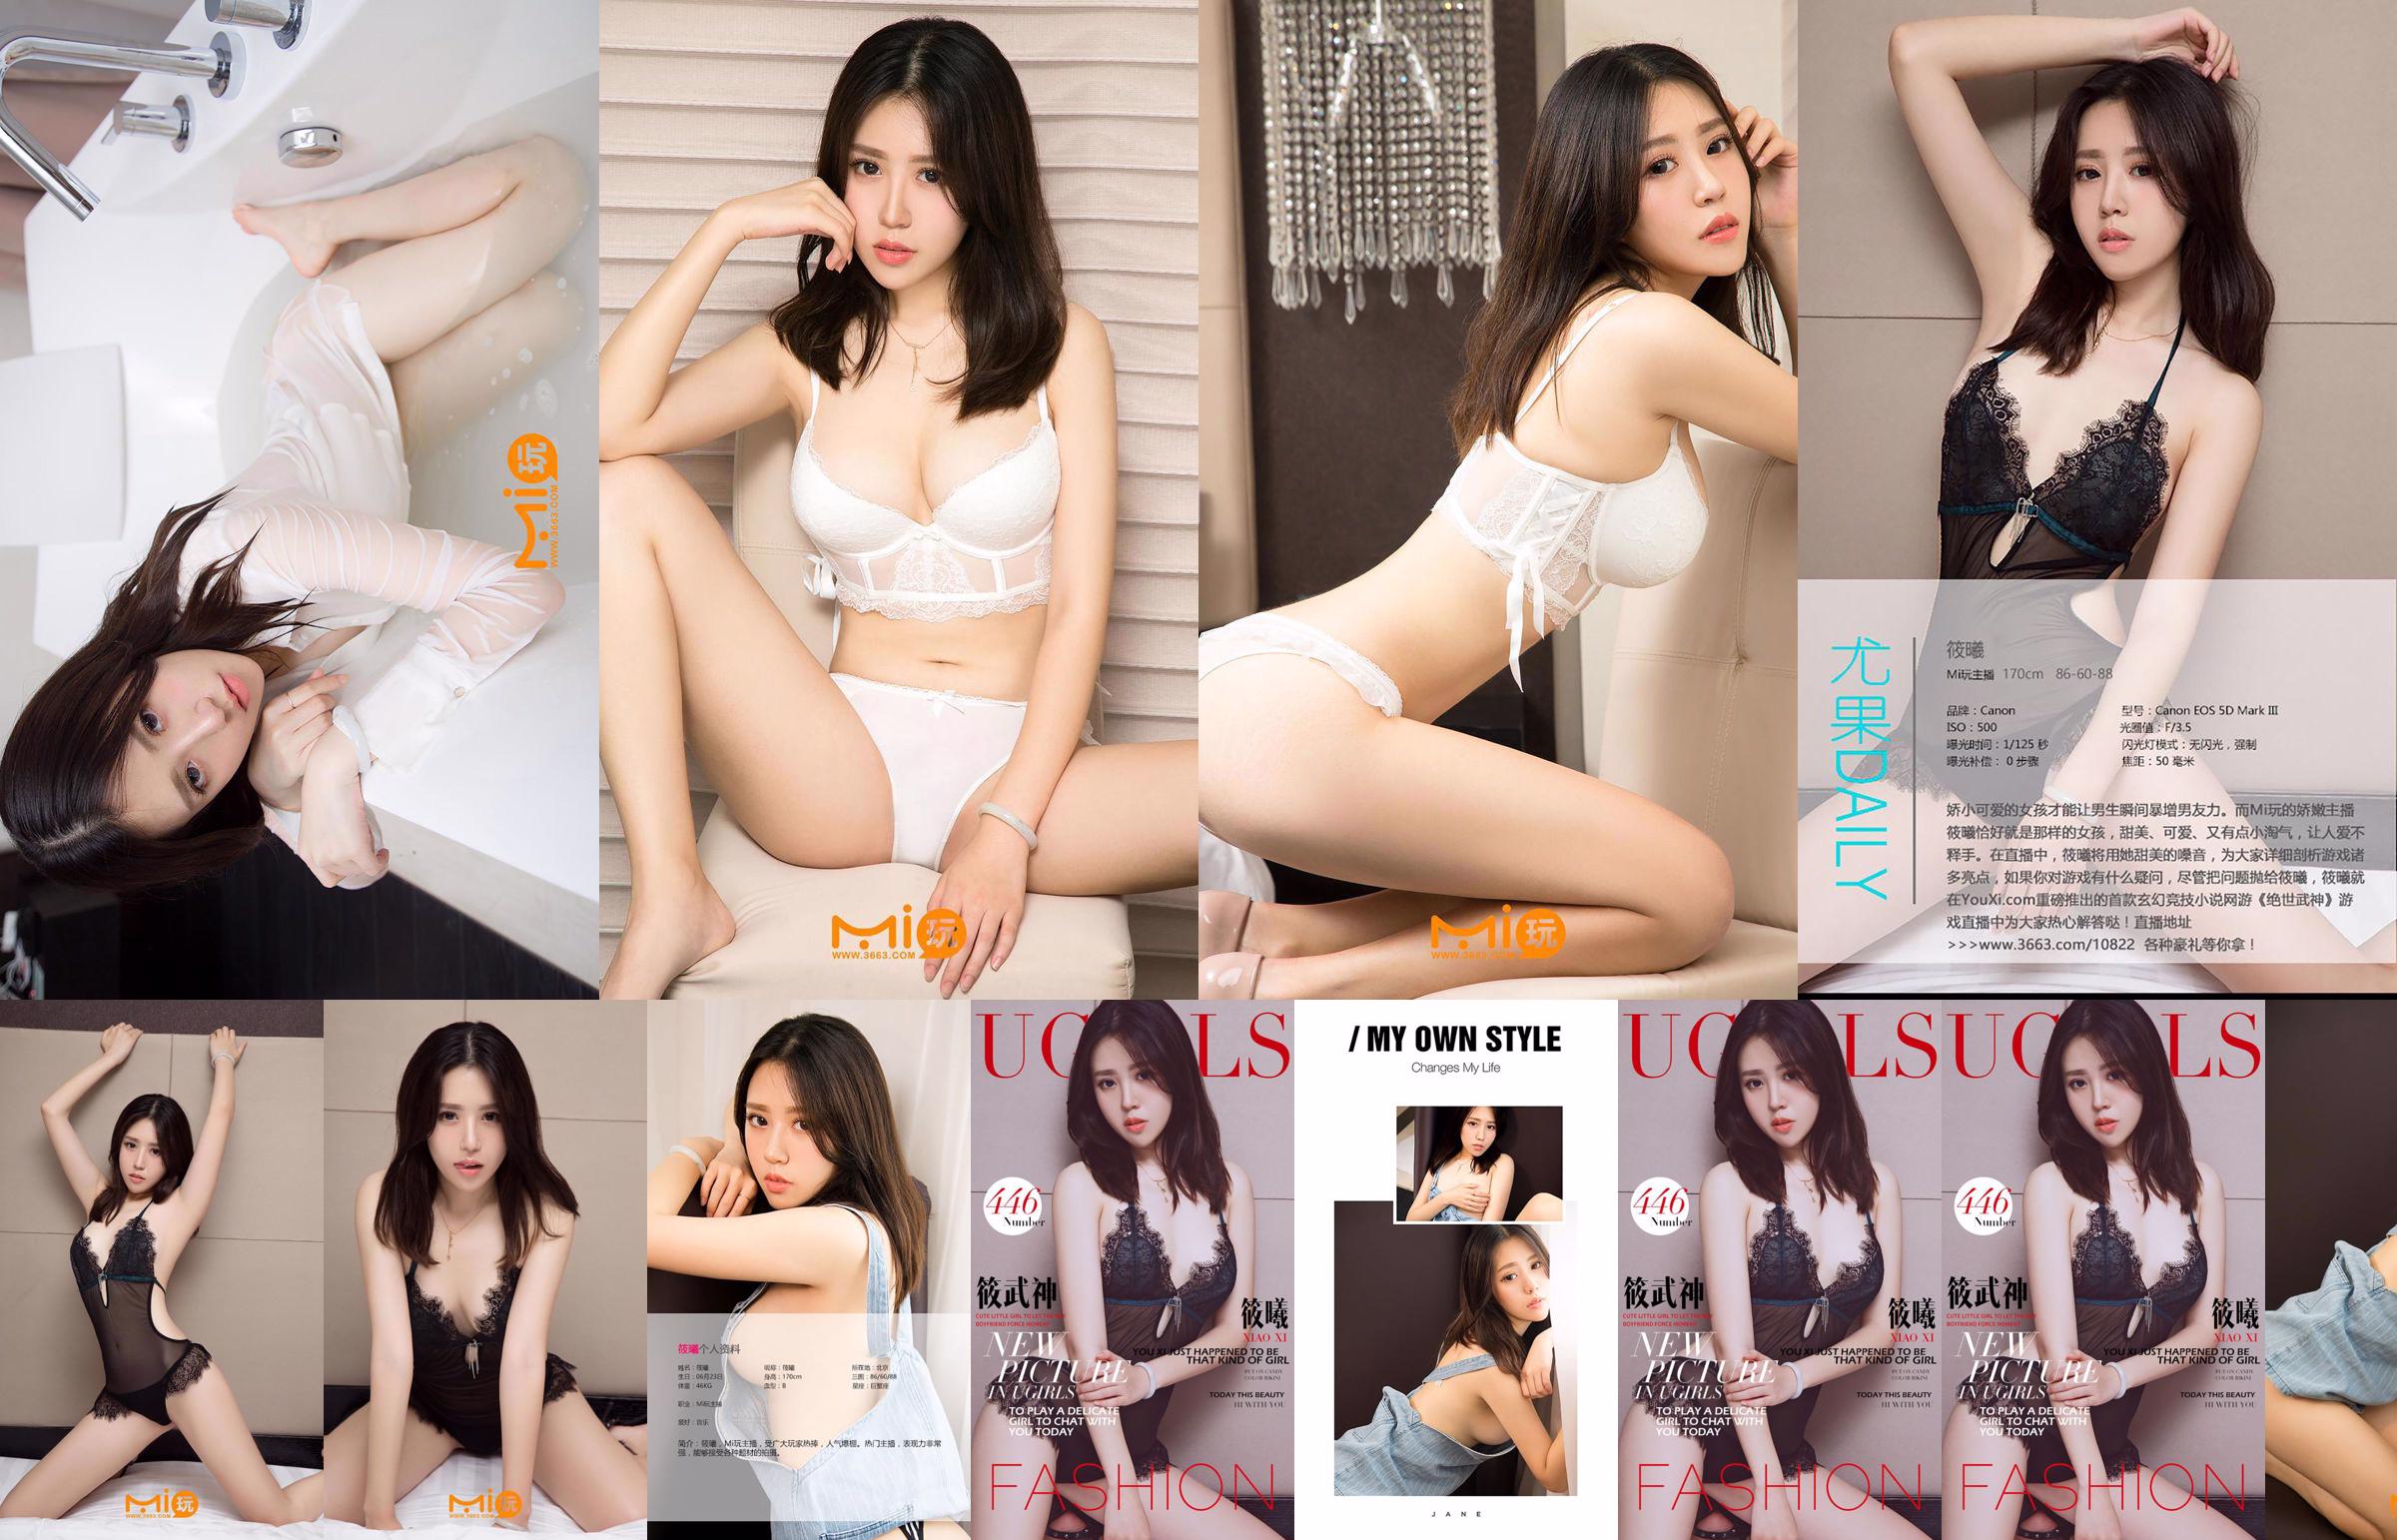 Xiao Xi «Xiao Wu Shen» [爱 优 物 Ugirls] N ° 446 No.921c84 Page 4